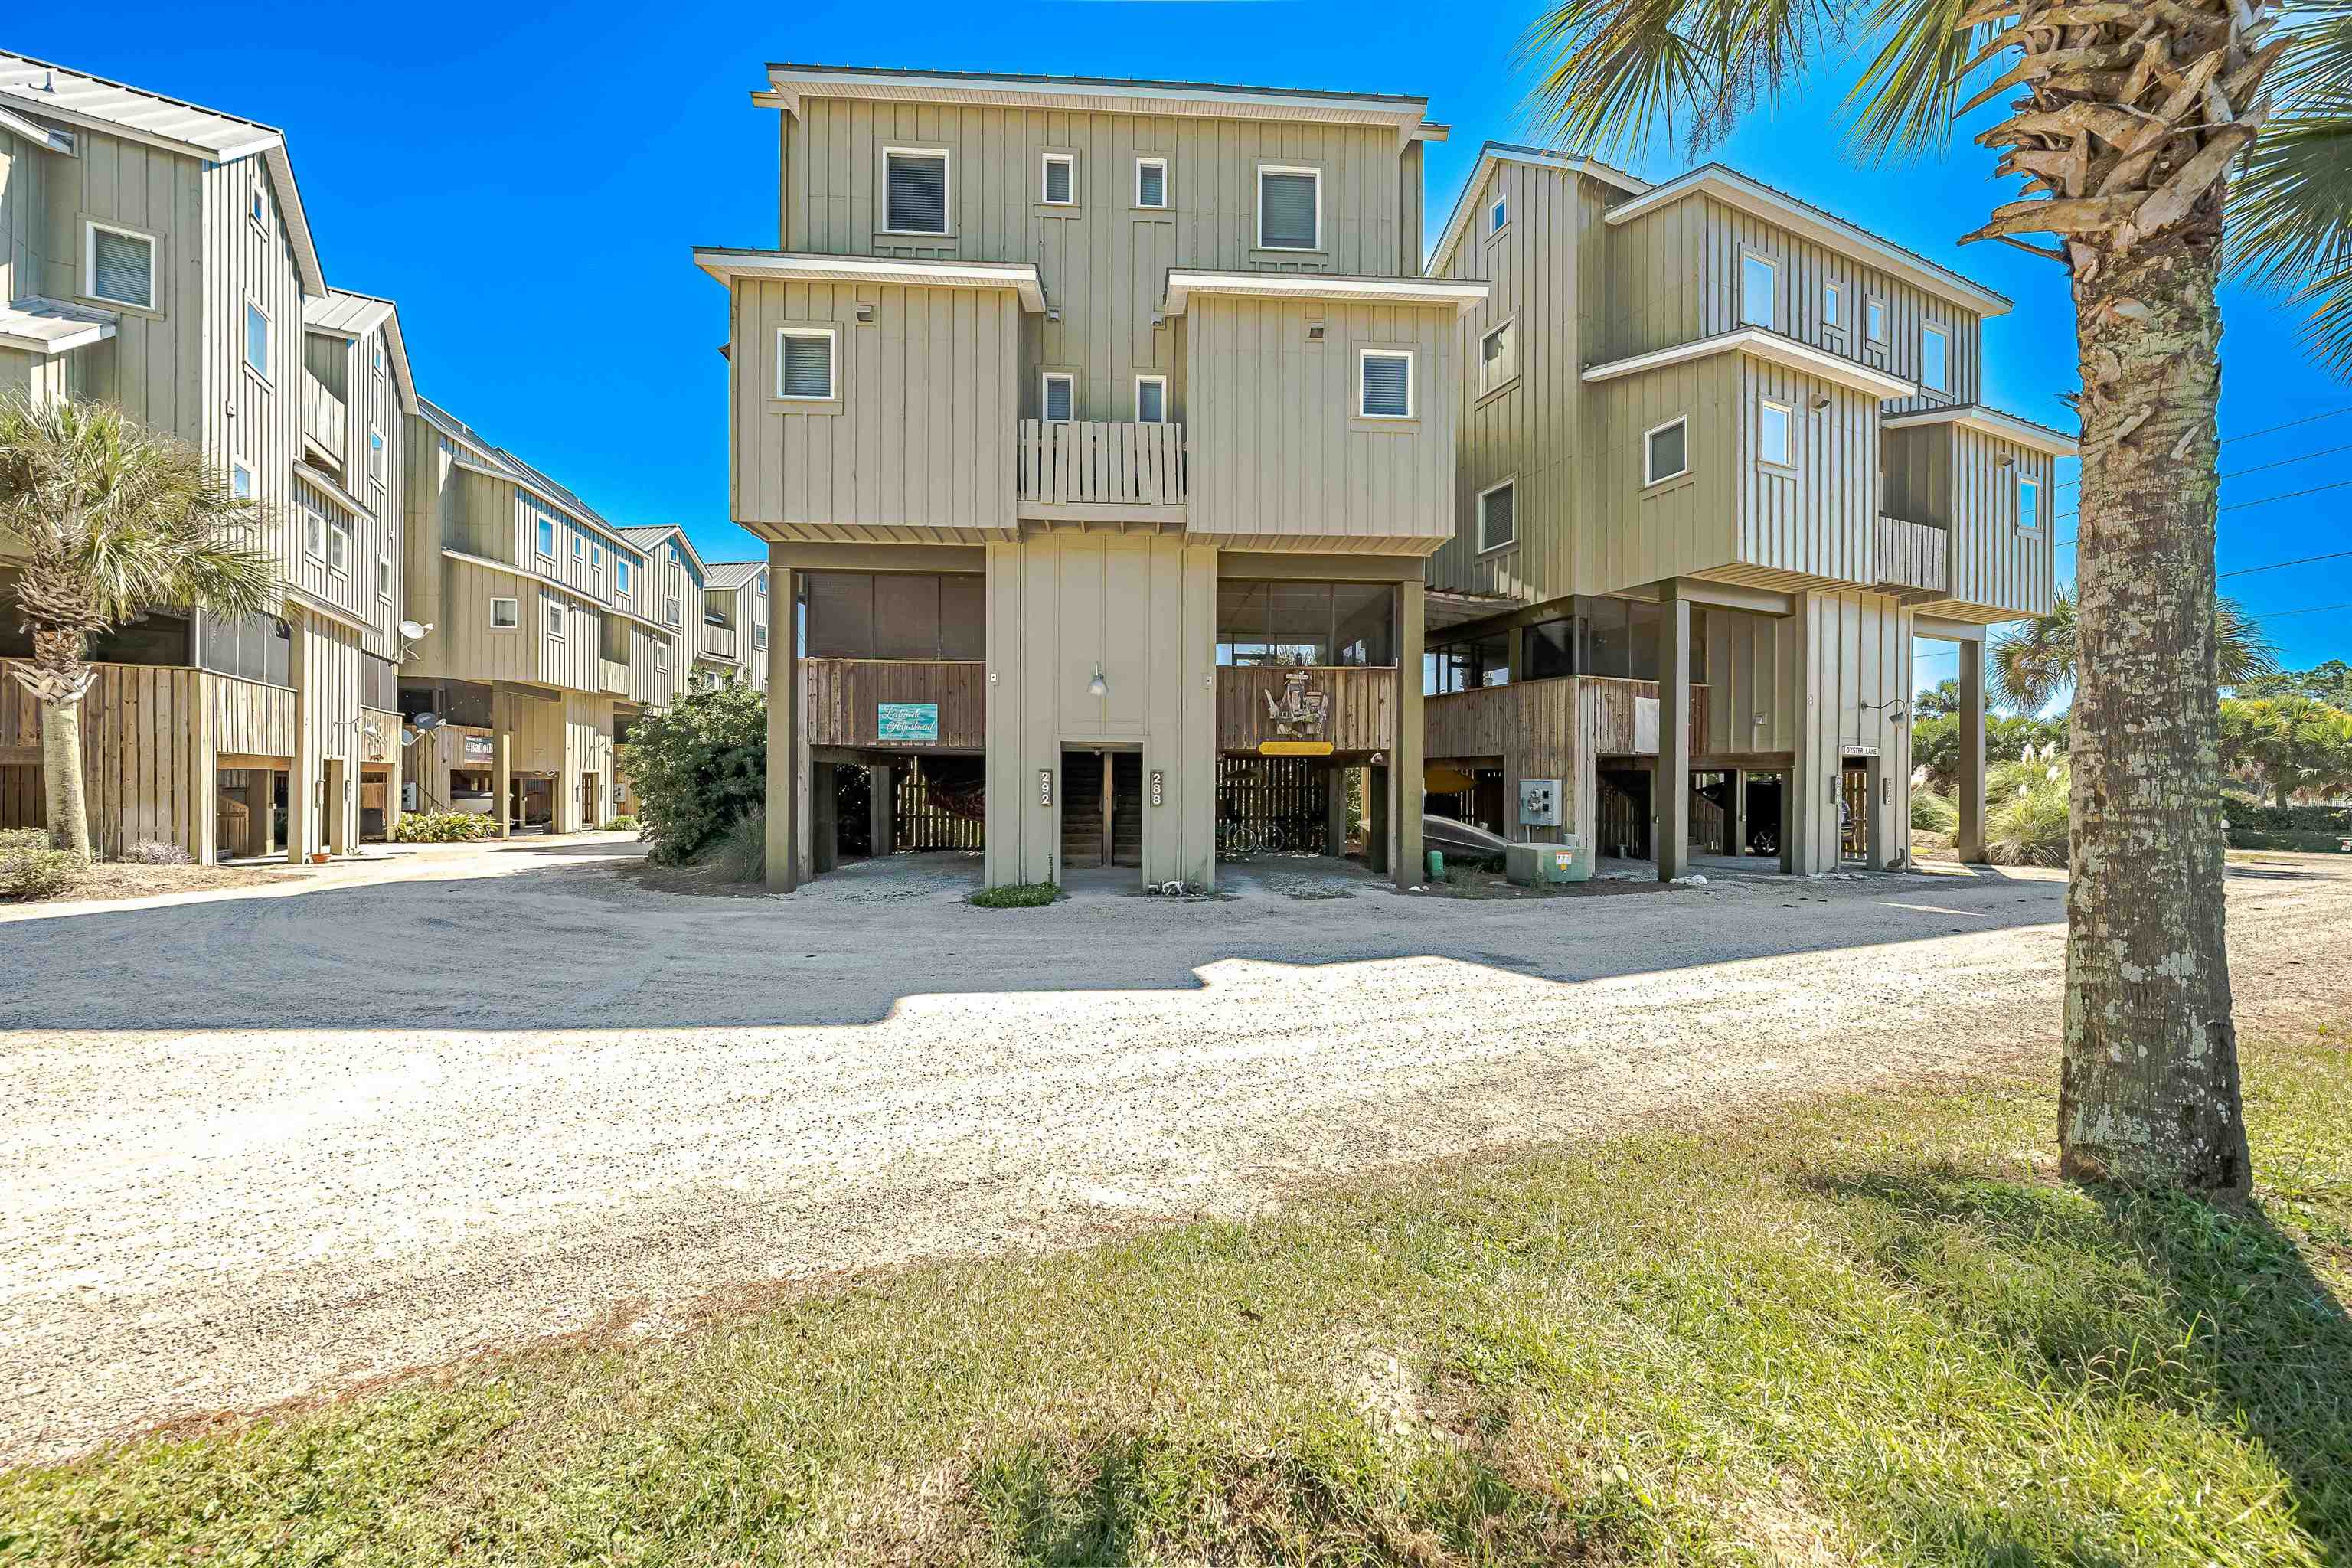 How does having your own "Piece of Heaven" sound?  This luxury river view condo is EXACTLY that! Located at the mouth of the Carrabelle River on Timber Island, this custom property is ready for you and your first mate! Interior is customized with solid pine doors throughout house and sold pine barns doors entering into the master suite upstairs. It boast intricate features throughout like granite counter tops, 2 full baths with granite shower stalls, cherry wood kitchen cabinetry, hearty pine floors, and so much more! Property is TURN-KEY, fully furnished! Screen porch below, 1 car covered carport, outside shower, the list goes on and on! Community pool, community restaurant on premises, public boat ramp! This is what peace and serenity starts with... This is a must see!